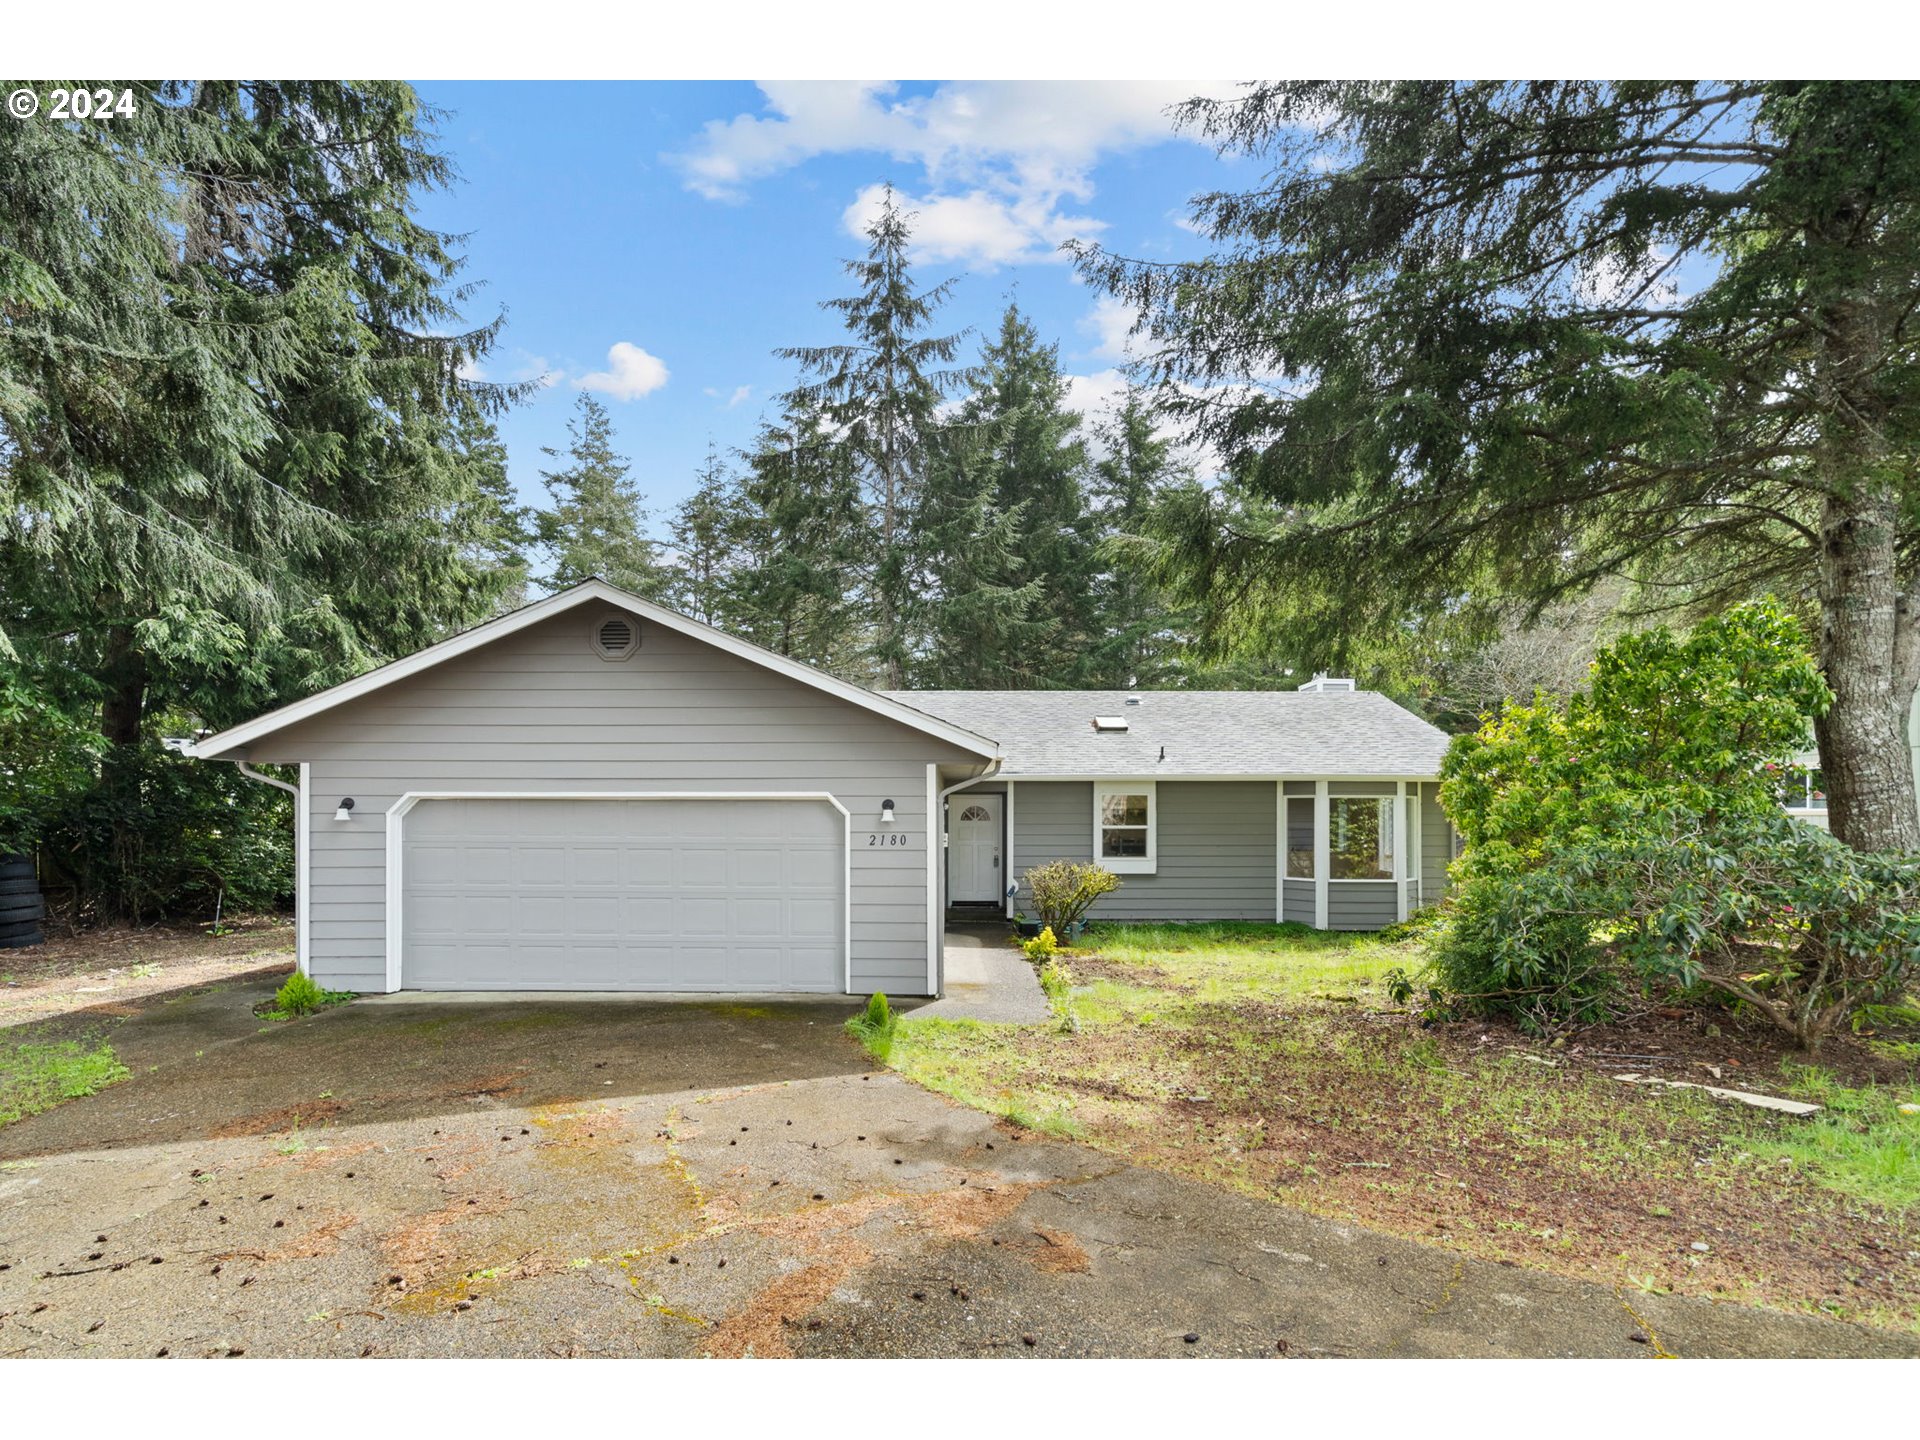 2180 15TH PL, Florence, OR 